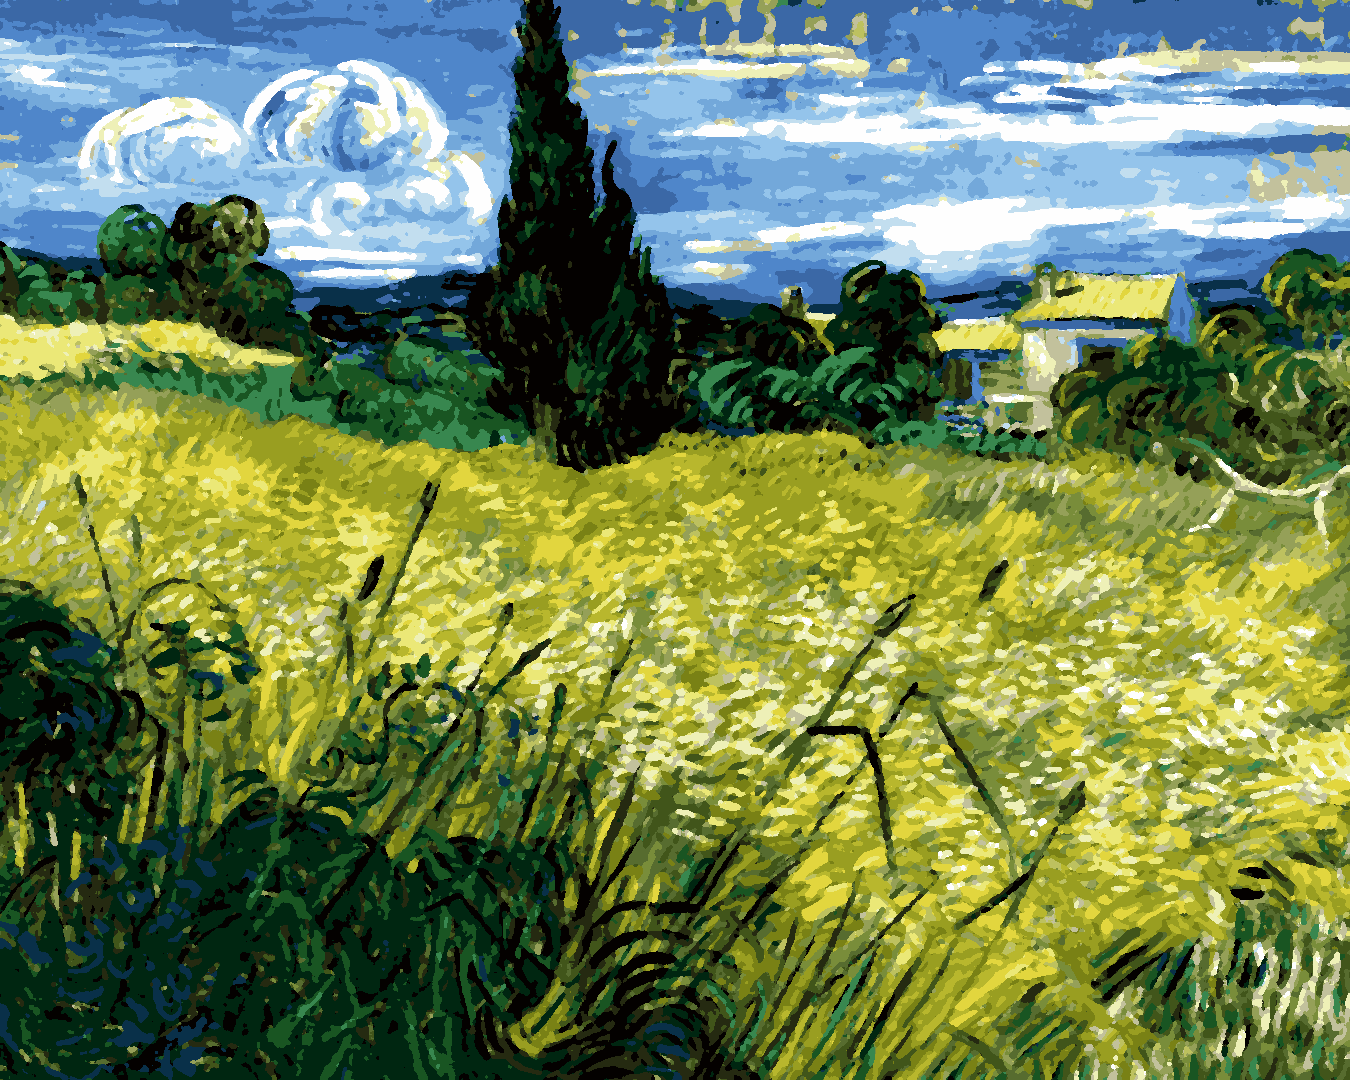 Van-Gogh Painting PD - (55) - Green Wheat Field with Cypress - Van-Go Paint-By-Number Kit